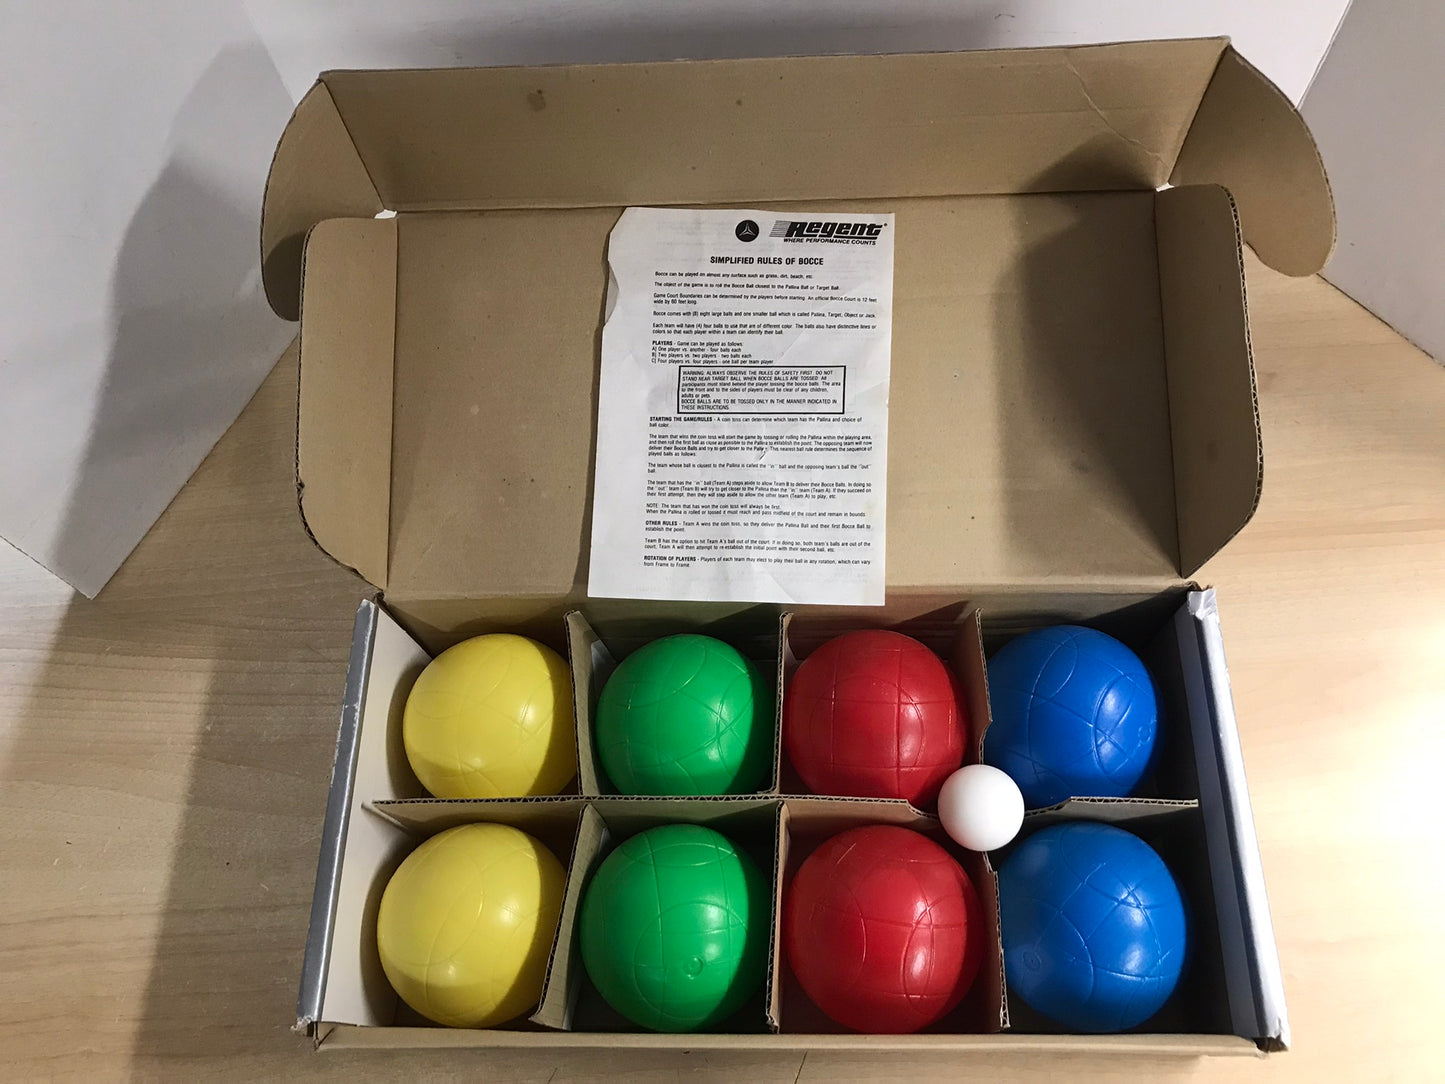 Bocce Ball Lawn Bowling New Set Outdoor Game Adult Family Fun